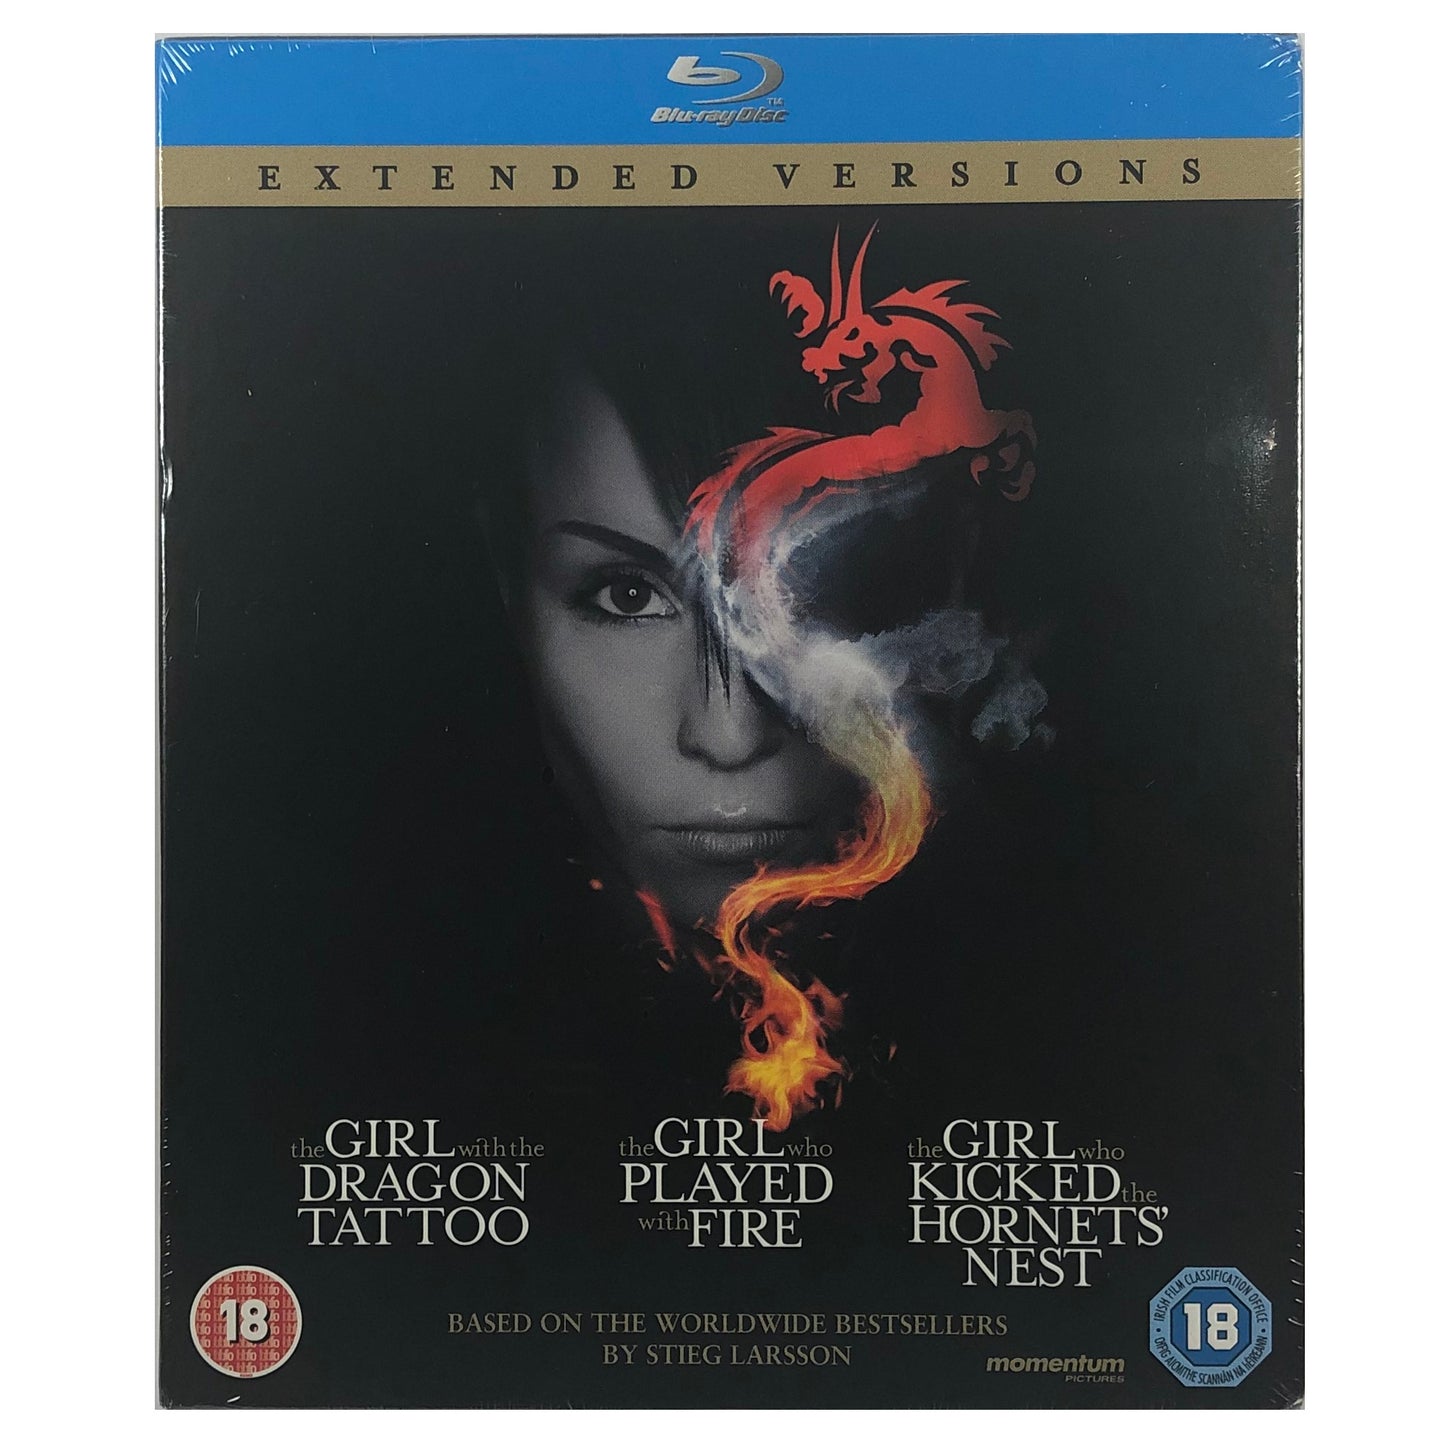 The Girl... Trilogy (Extended Versions) Blu-Ray Box Set